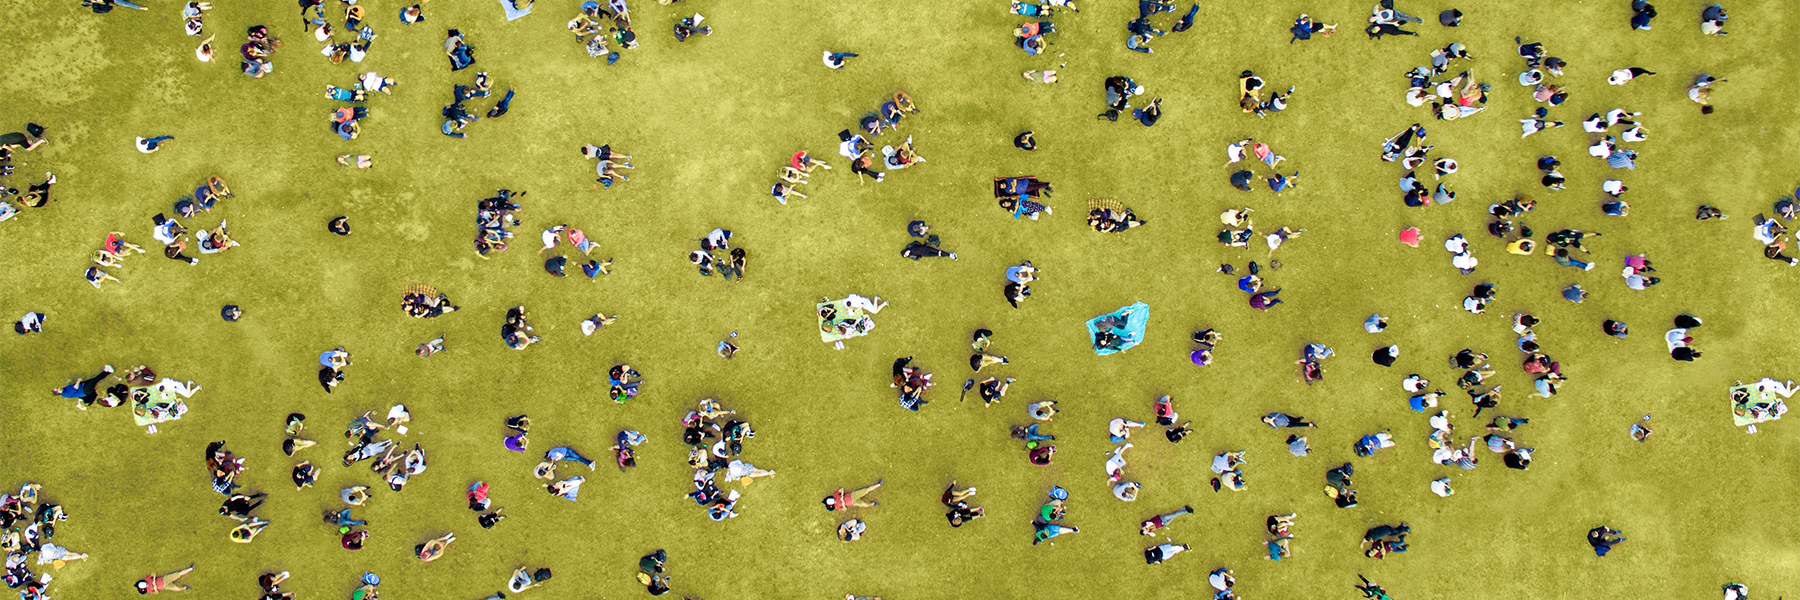 Overhead view of people spread out sitting in a field, individually and in goups